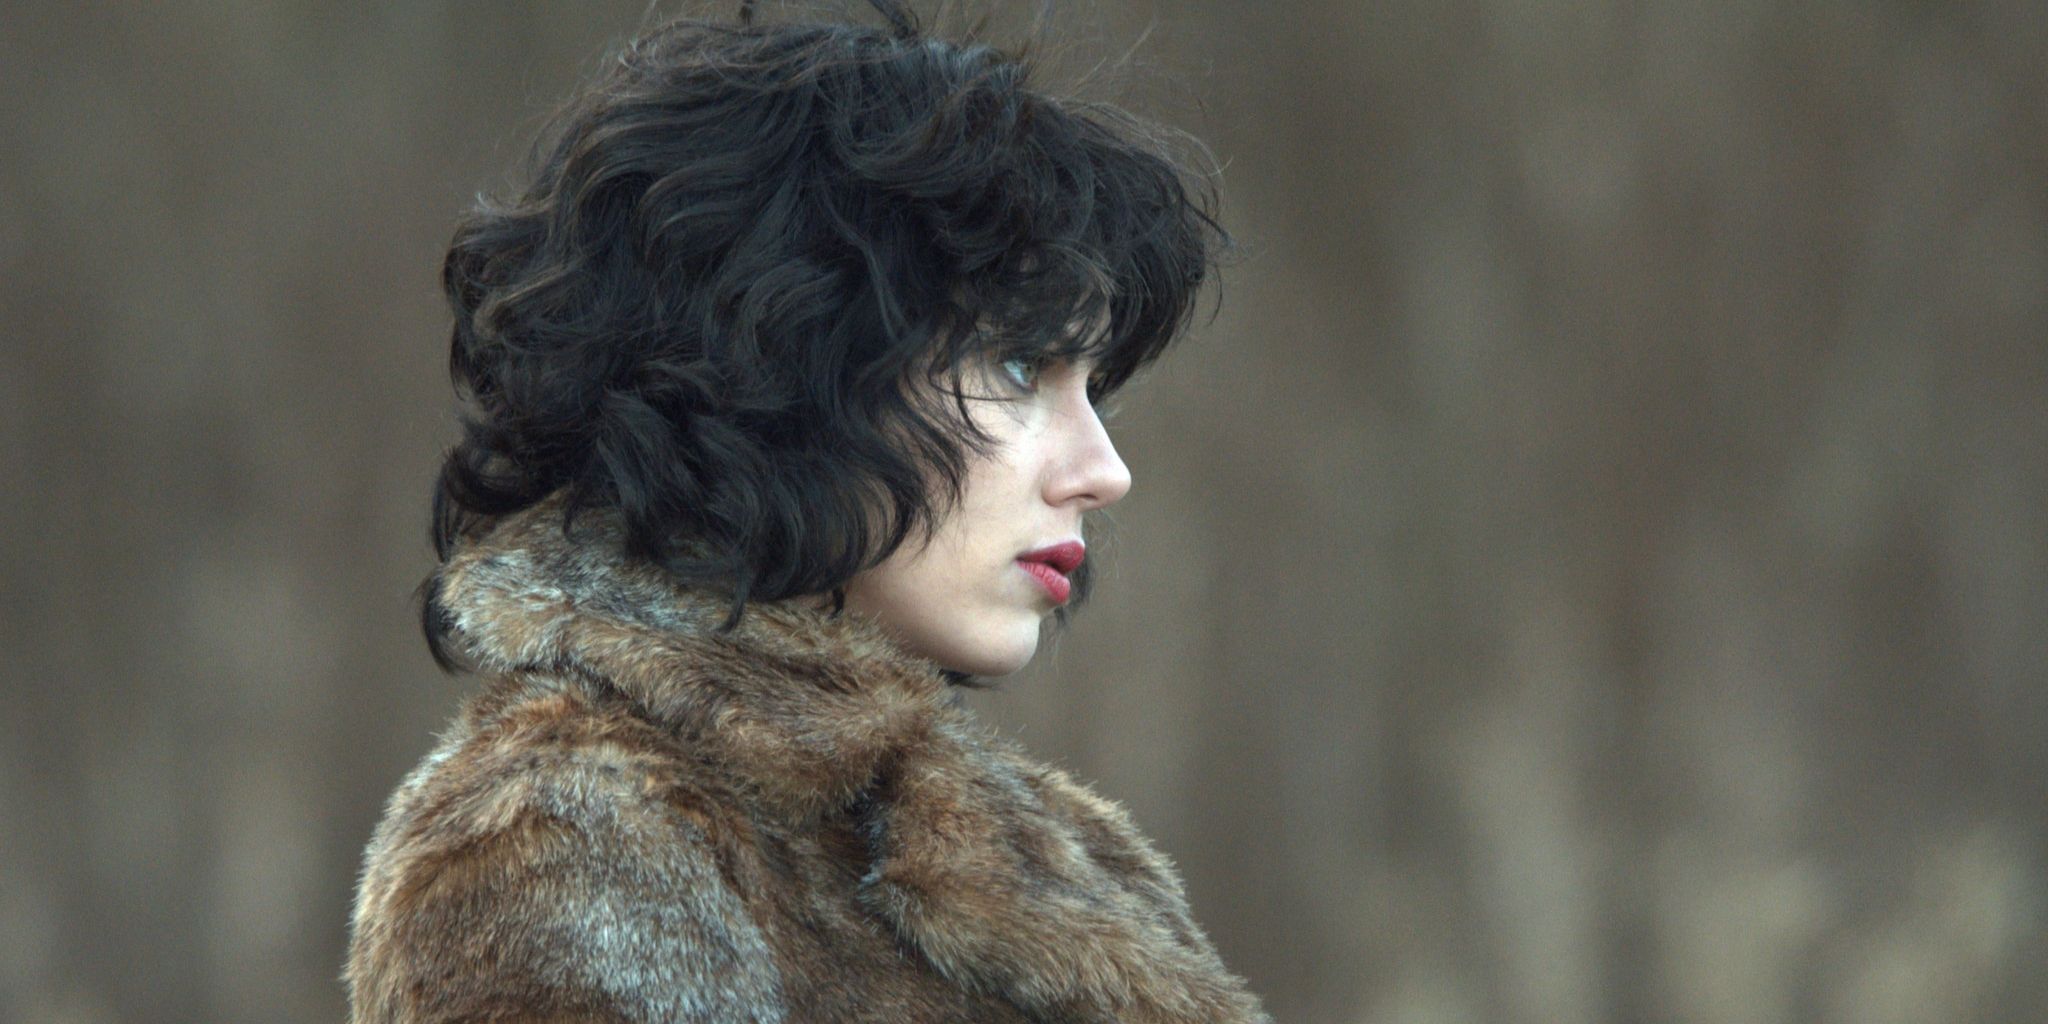 Still from 'Under the Skin': Scarlett Johansson faces to the right, wearing a fur coat.